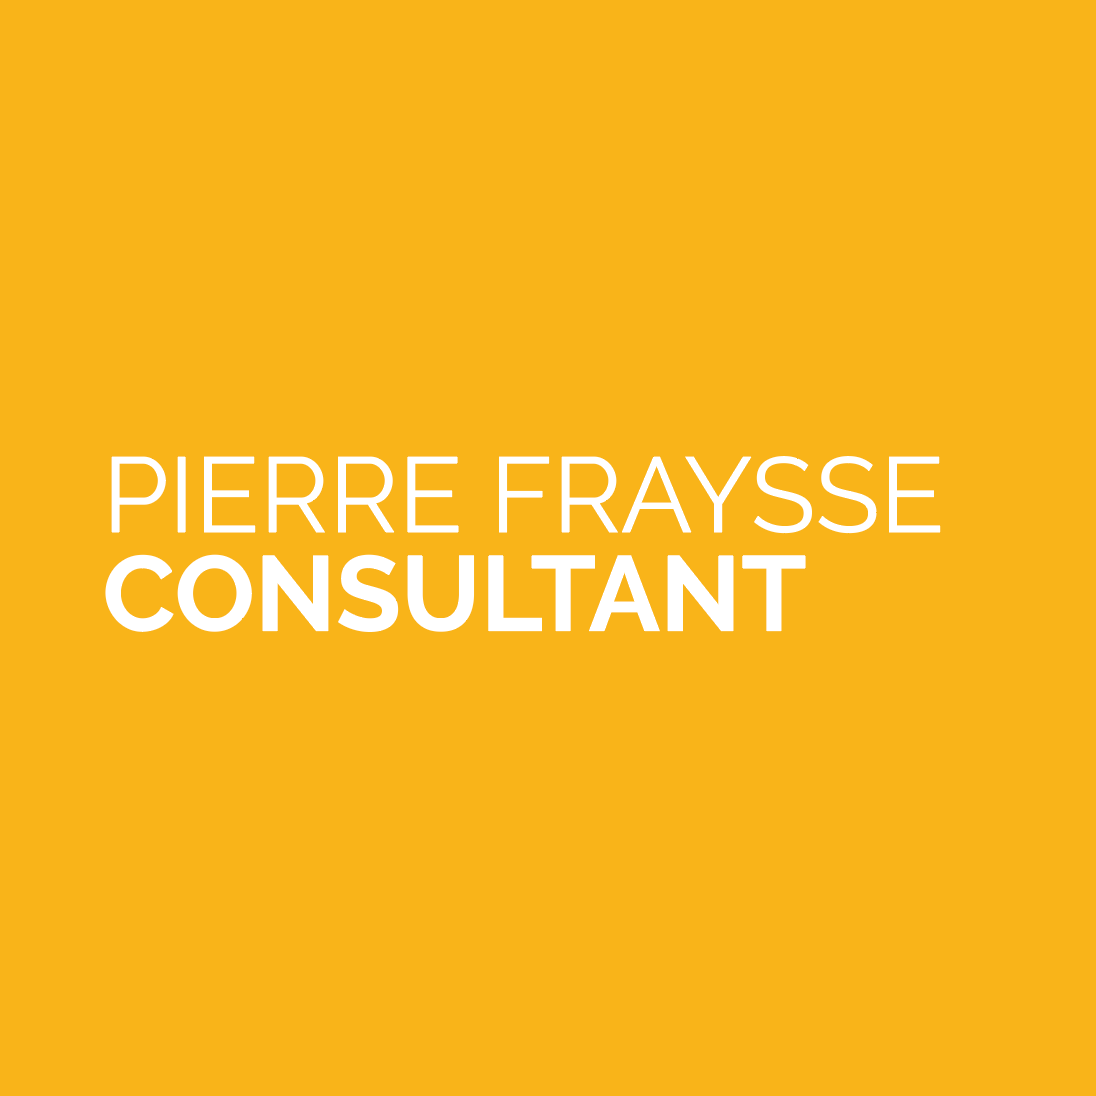 PIERRE FRAYSSE CONSULTANT